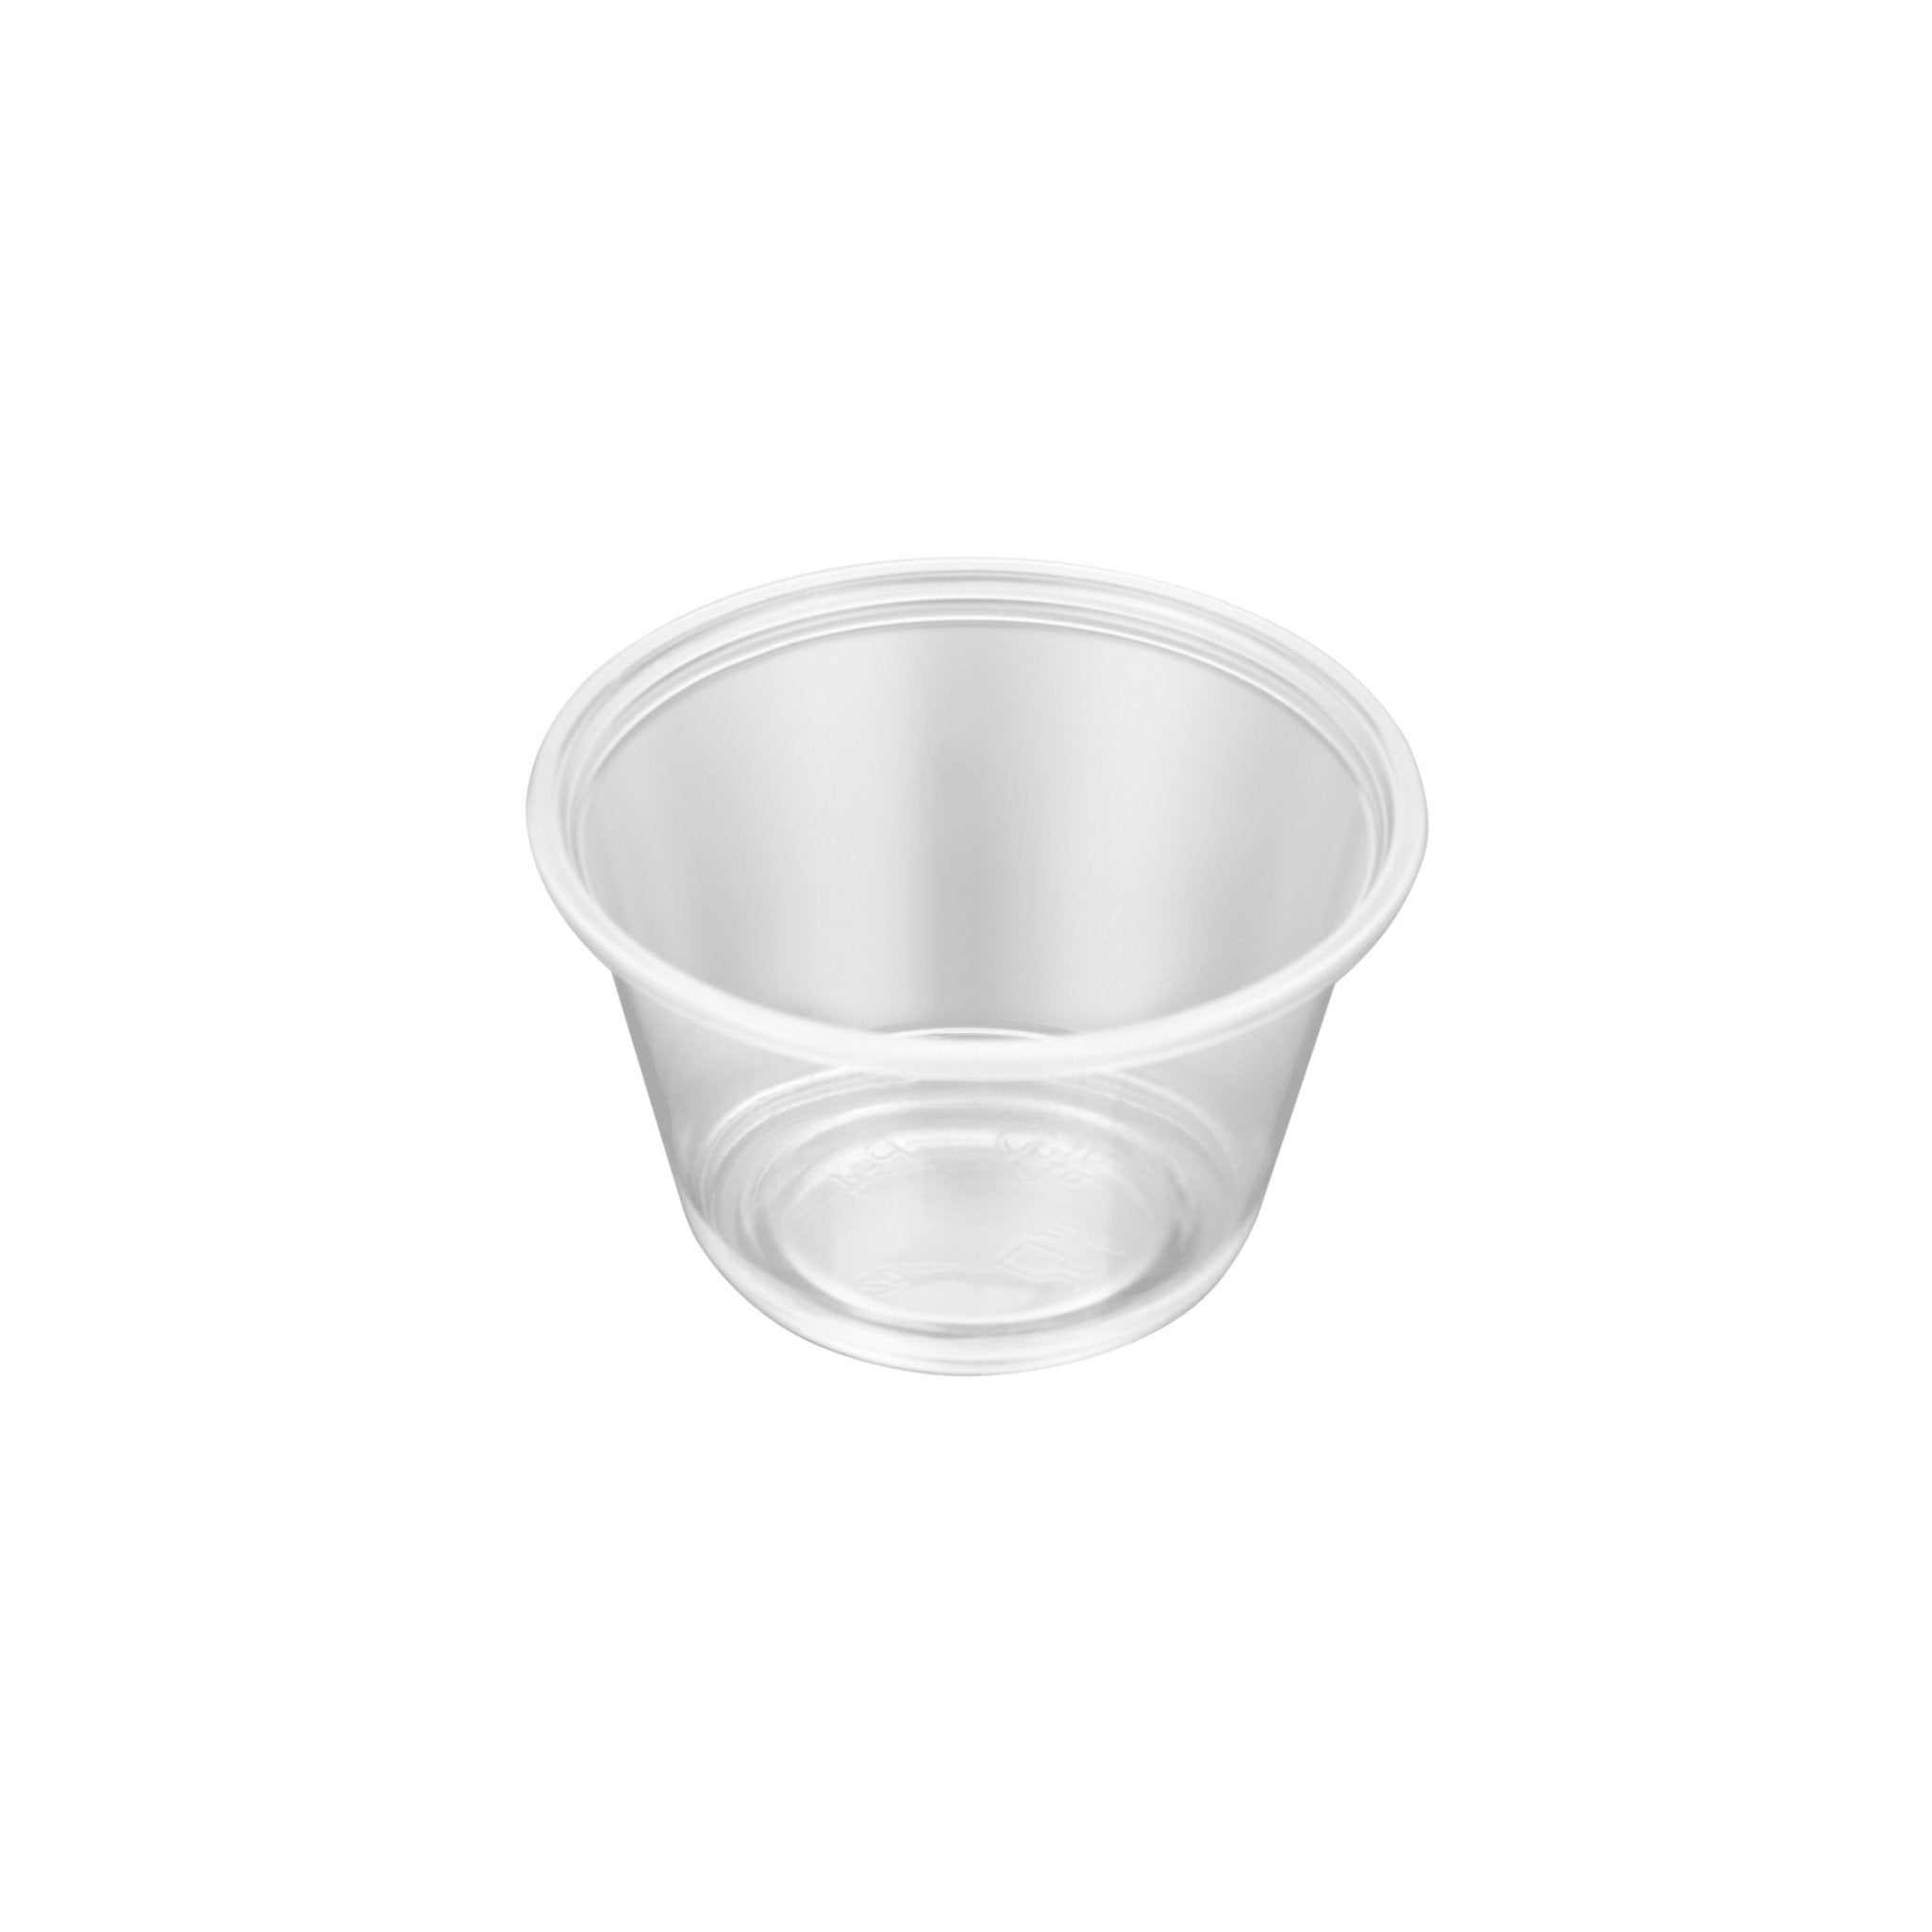 4oz Portion Cups, Polypropelene, 2500pc - Feast Source